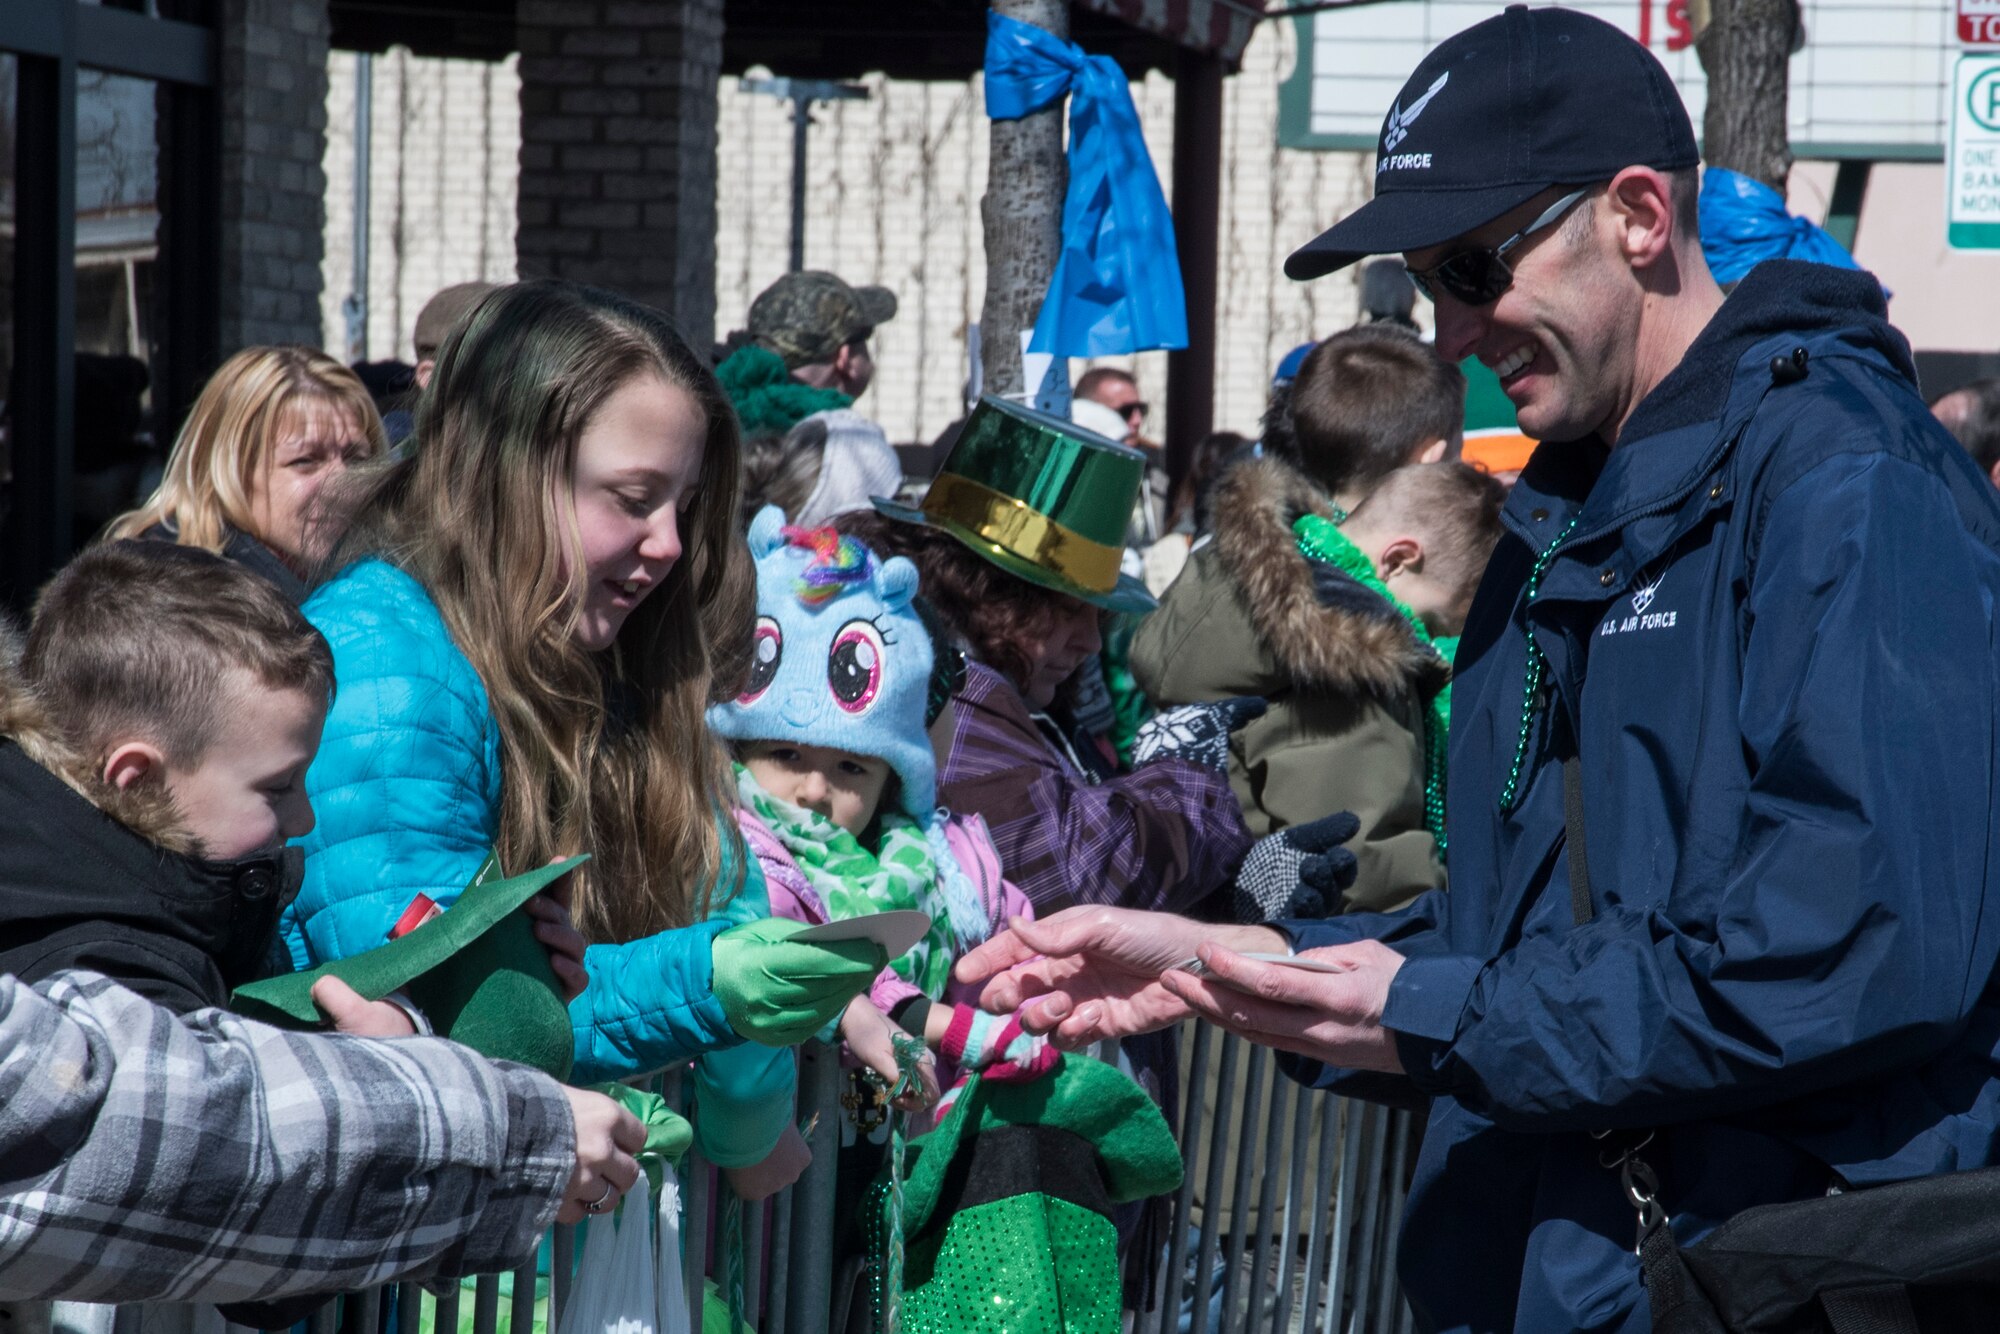 Col. E. John Teichert, 11th Wing and Joint Base Andrews commander, hands out Air Force lanyards, pins and stickers during the South Side St. Patrick’s Day Parade in Chicago, March 12, 2017. Teichert accompanied the honor guard with Chief Master Sgt. Nathaniel M. Perry Jr., 11th Wing and JBA command chief master sergeant. The 11th Wing serves as a host unit for the honor guard and U.S. Air Force Band, both of which are based out of Joint Base Anacostia-Bolling, District of Colombia. (U.S. Air Force photo by Senior Airman Jordyn Fetter)